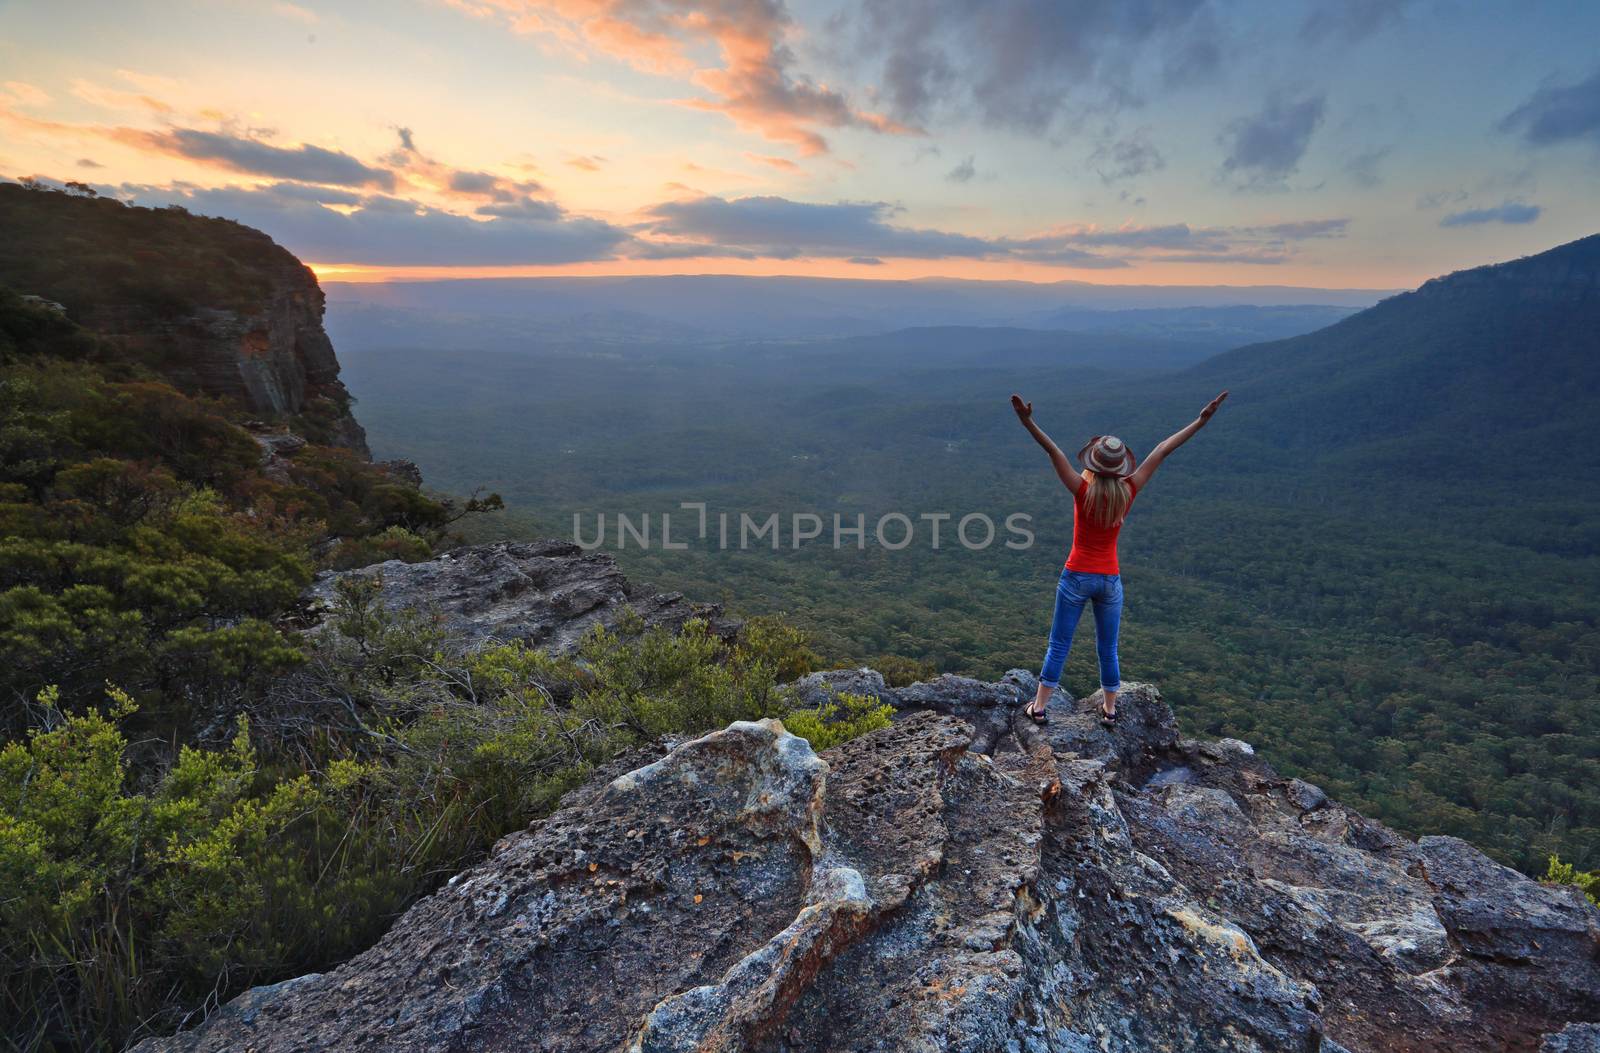 Hiker enjoys magnificent views from mountain top to valley views in Katoomba Blue Mountains.